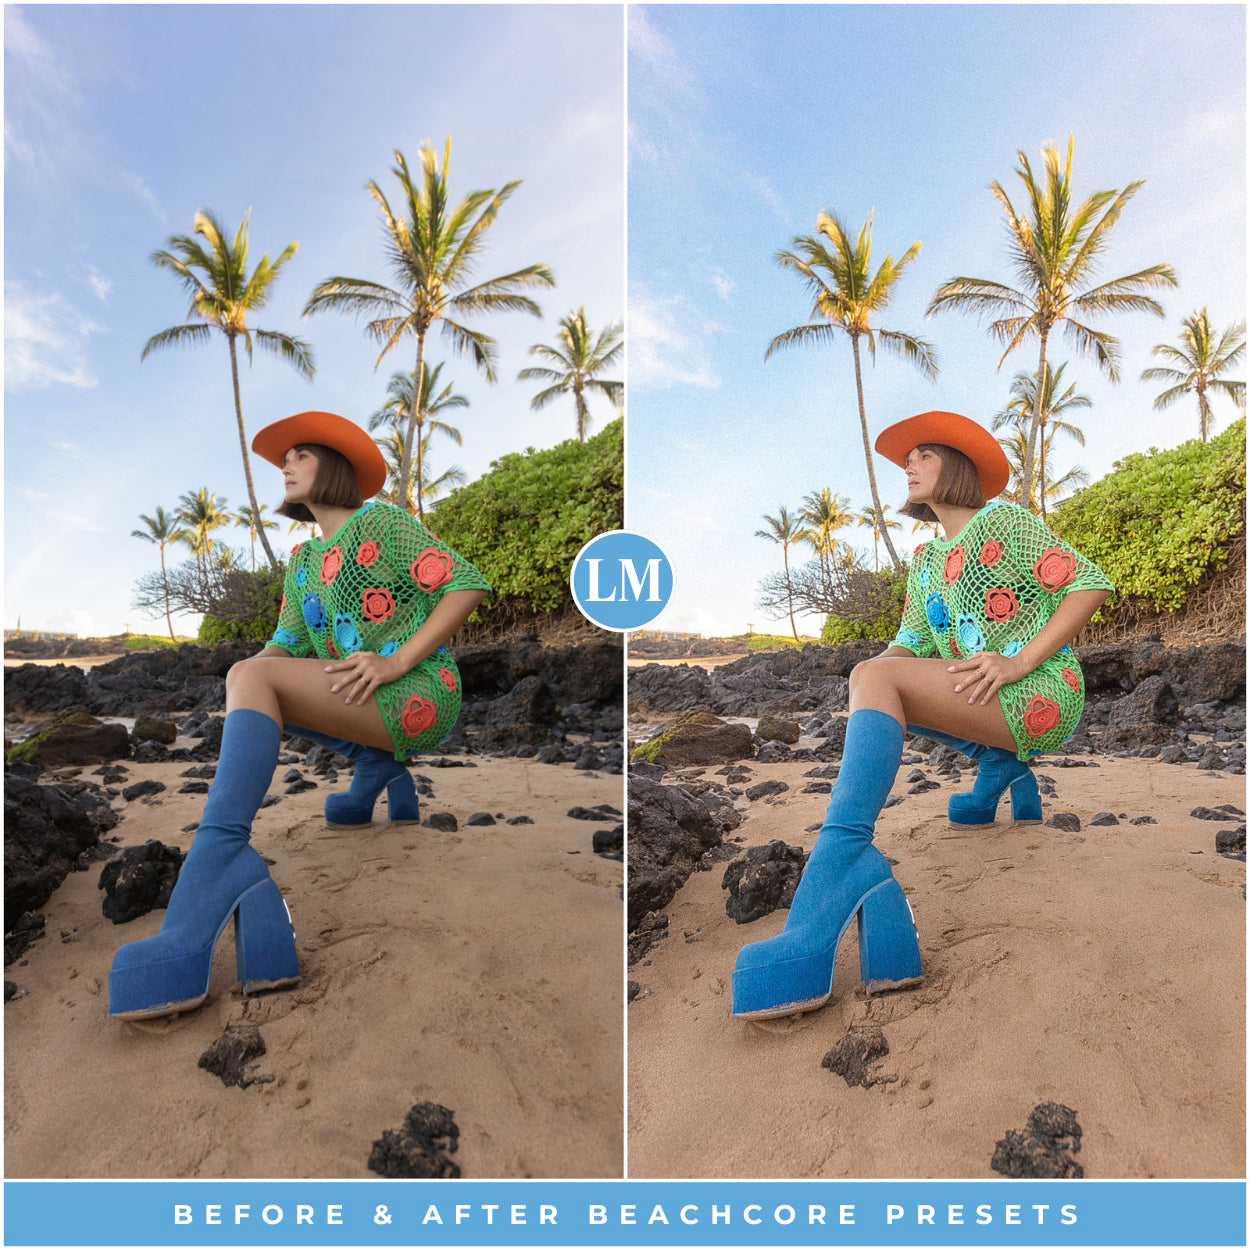 Blogger Beachcore Beach Lightroom Presets The Best Photo Editing Preset Filters For Lightroom Mobile And Desktop For Photographers and Instagram Influencers By Lou And Marks Presets